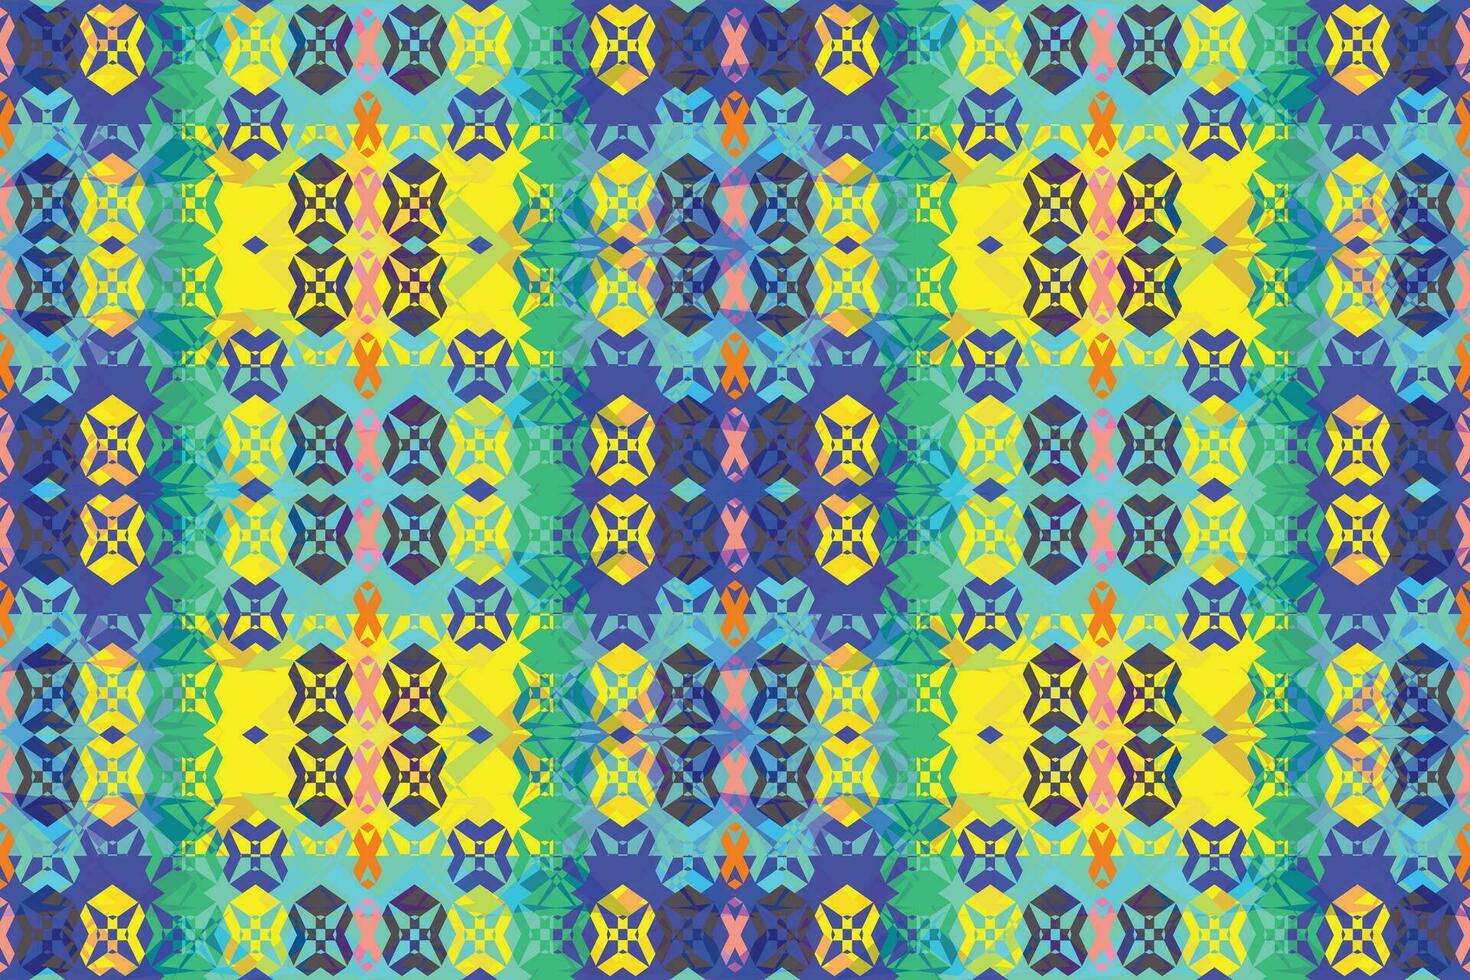 Abstract Vector Patterns Free Vector